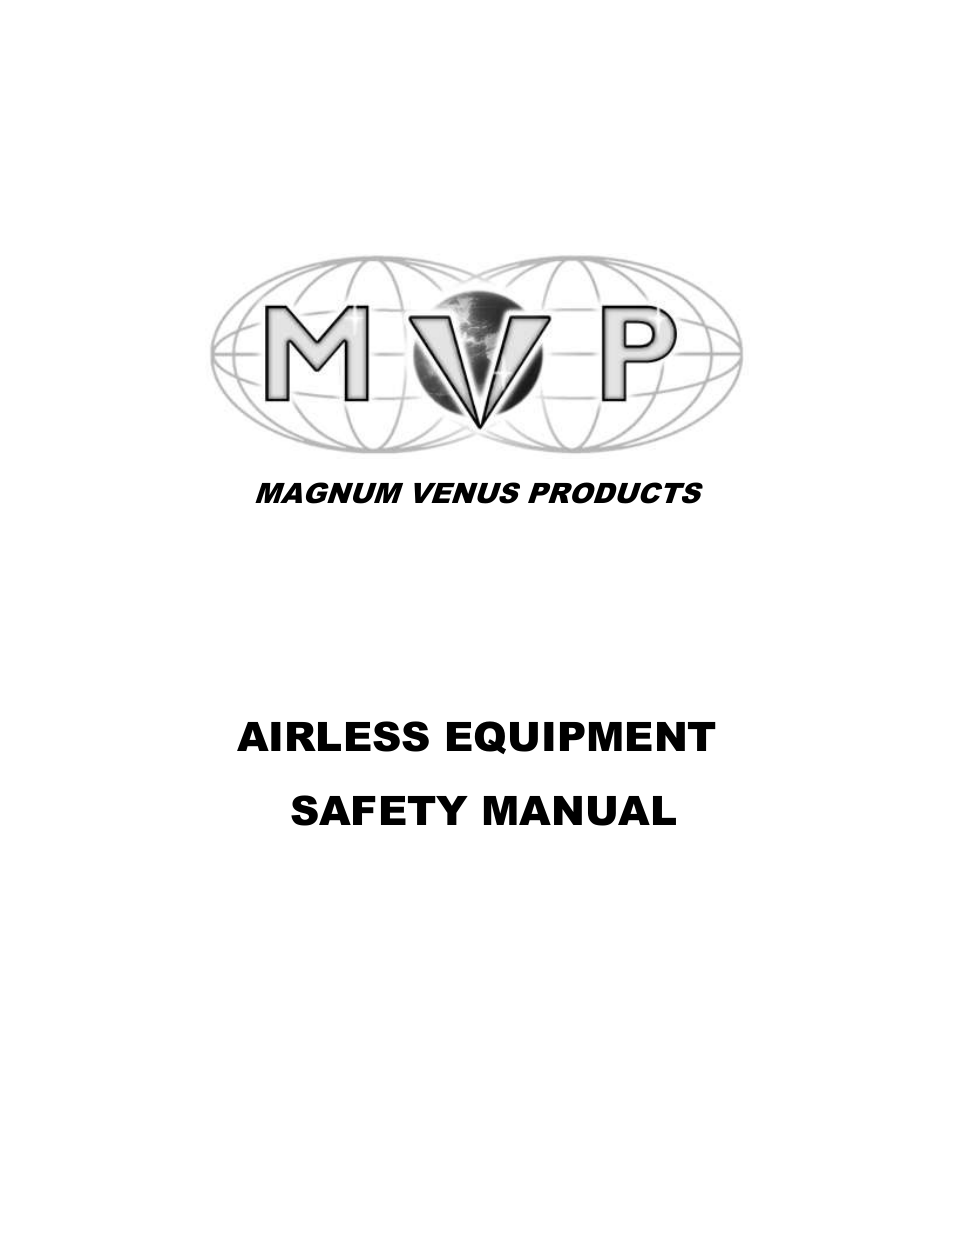 AIRLESS EQUIPMENT SAFETY MANUAL